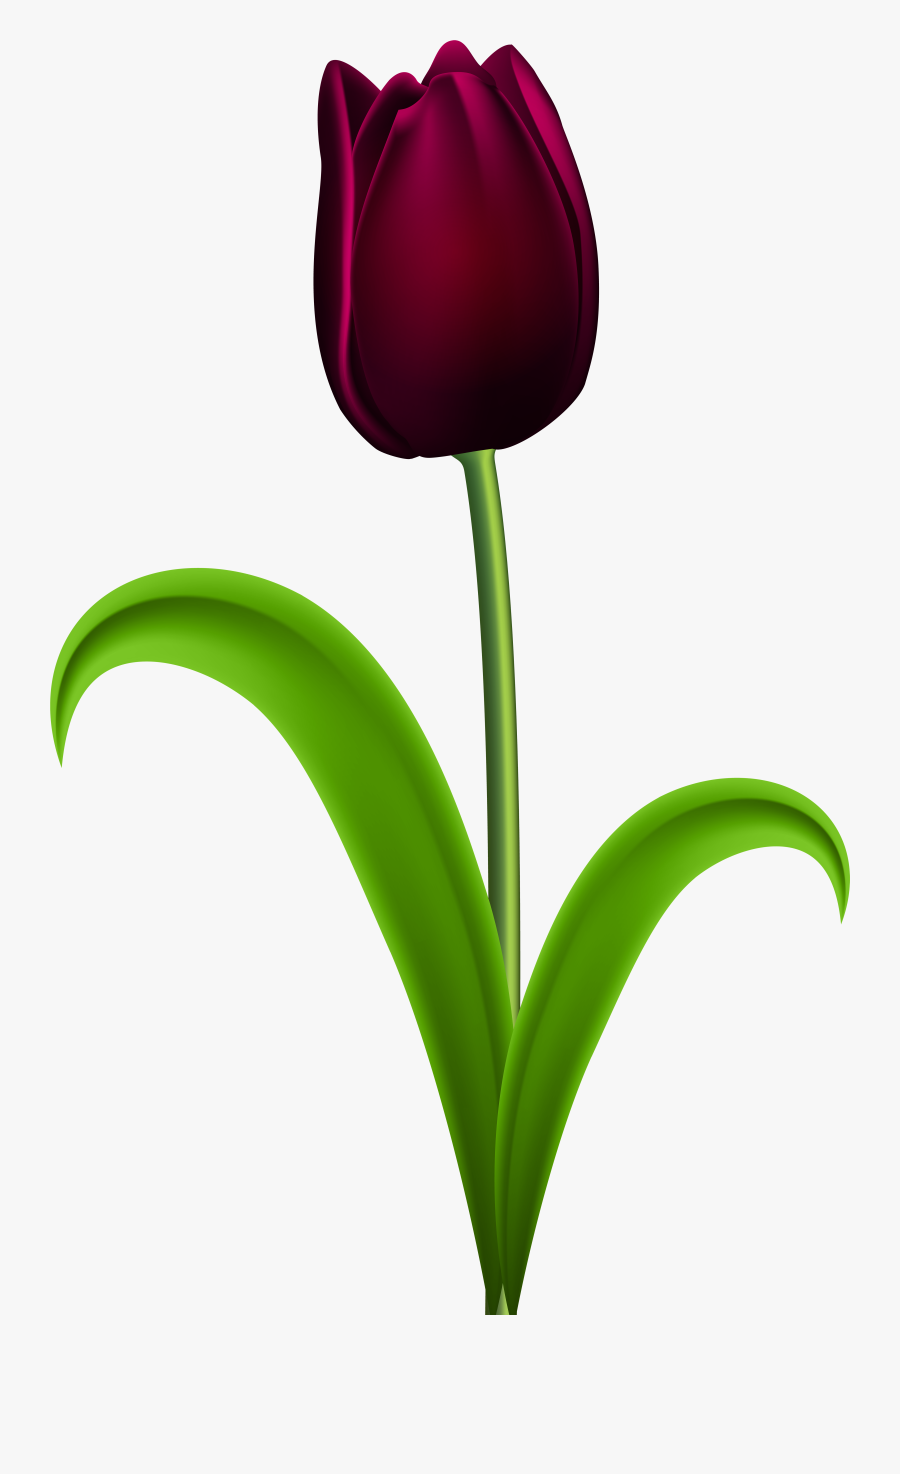 Png Free Download Flower At Getdrawings Com - Purple Tulips Flowers Clipart, Transparent Clipart